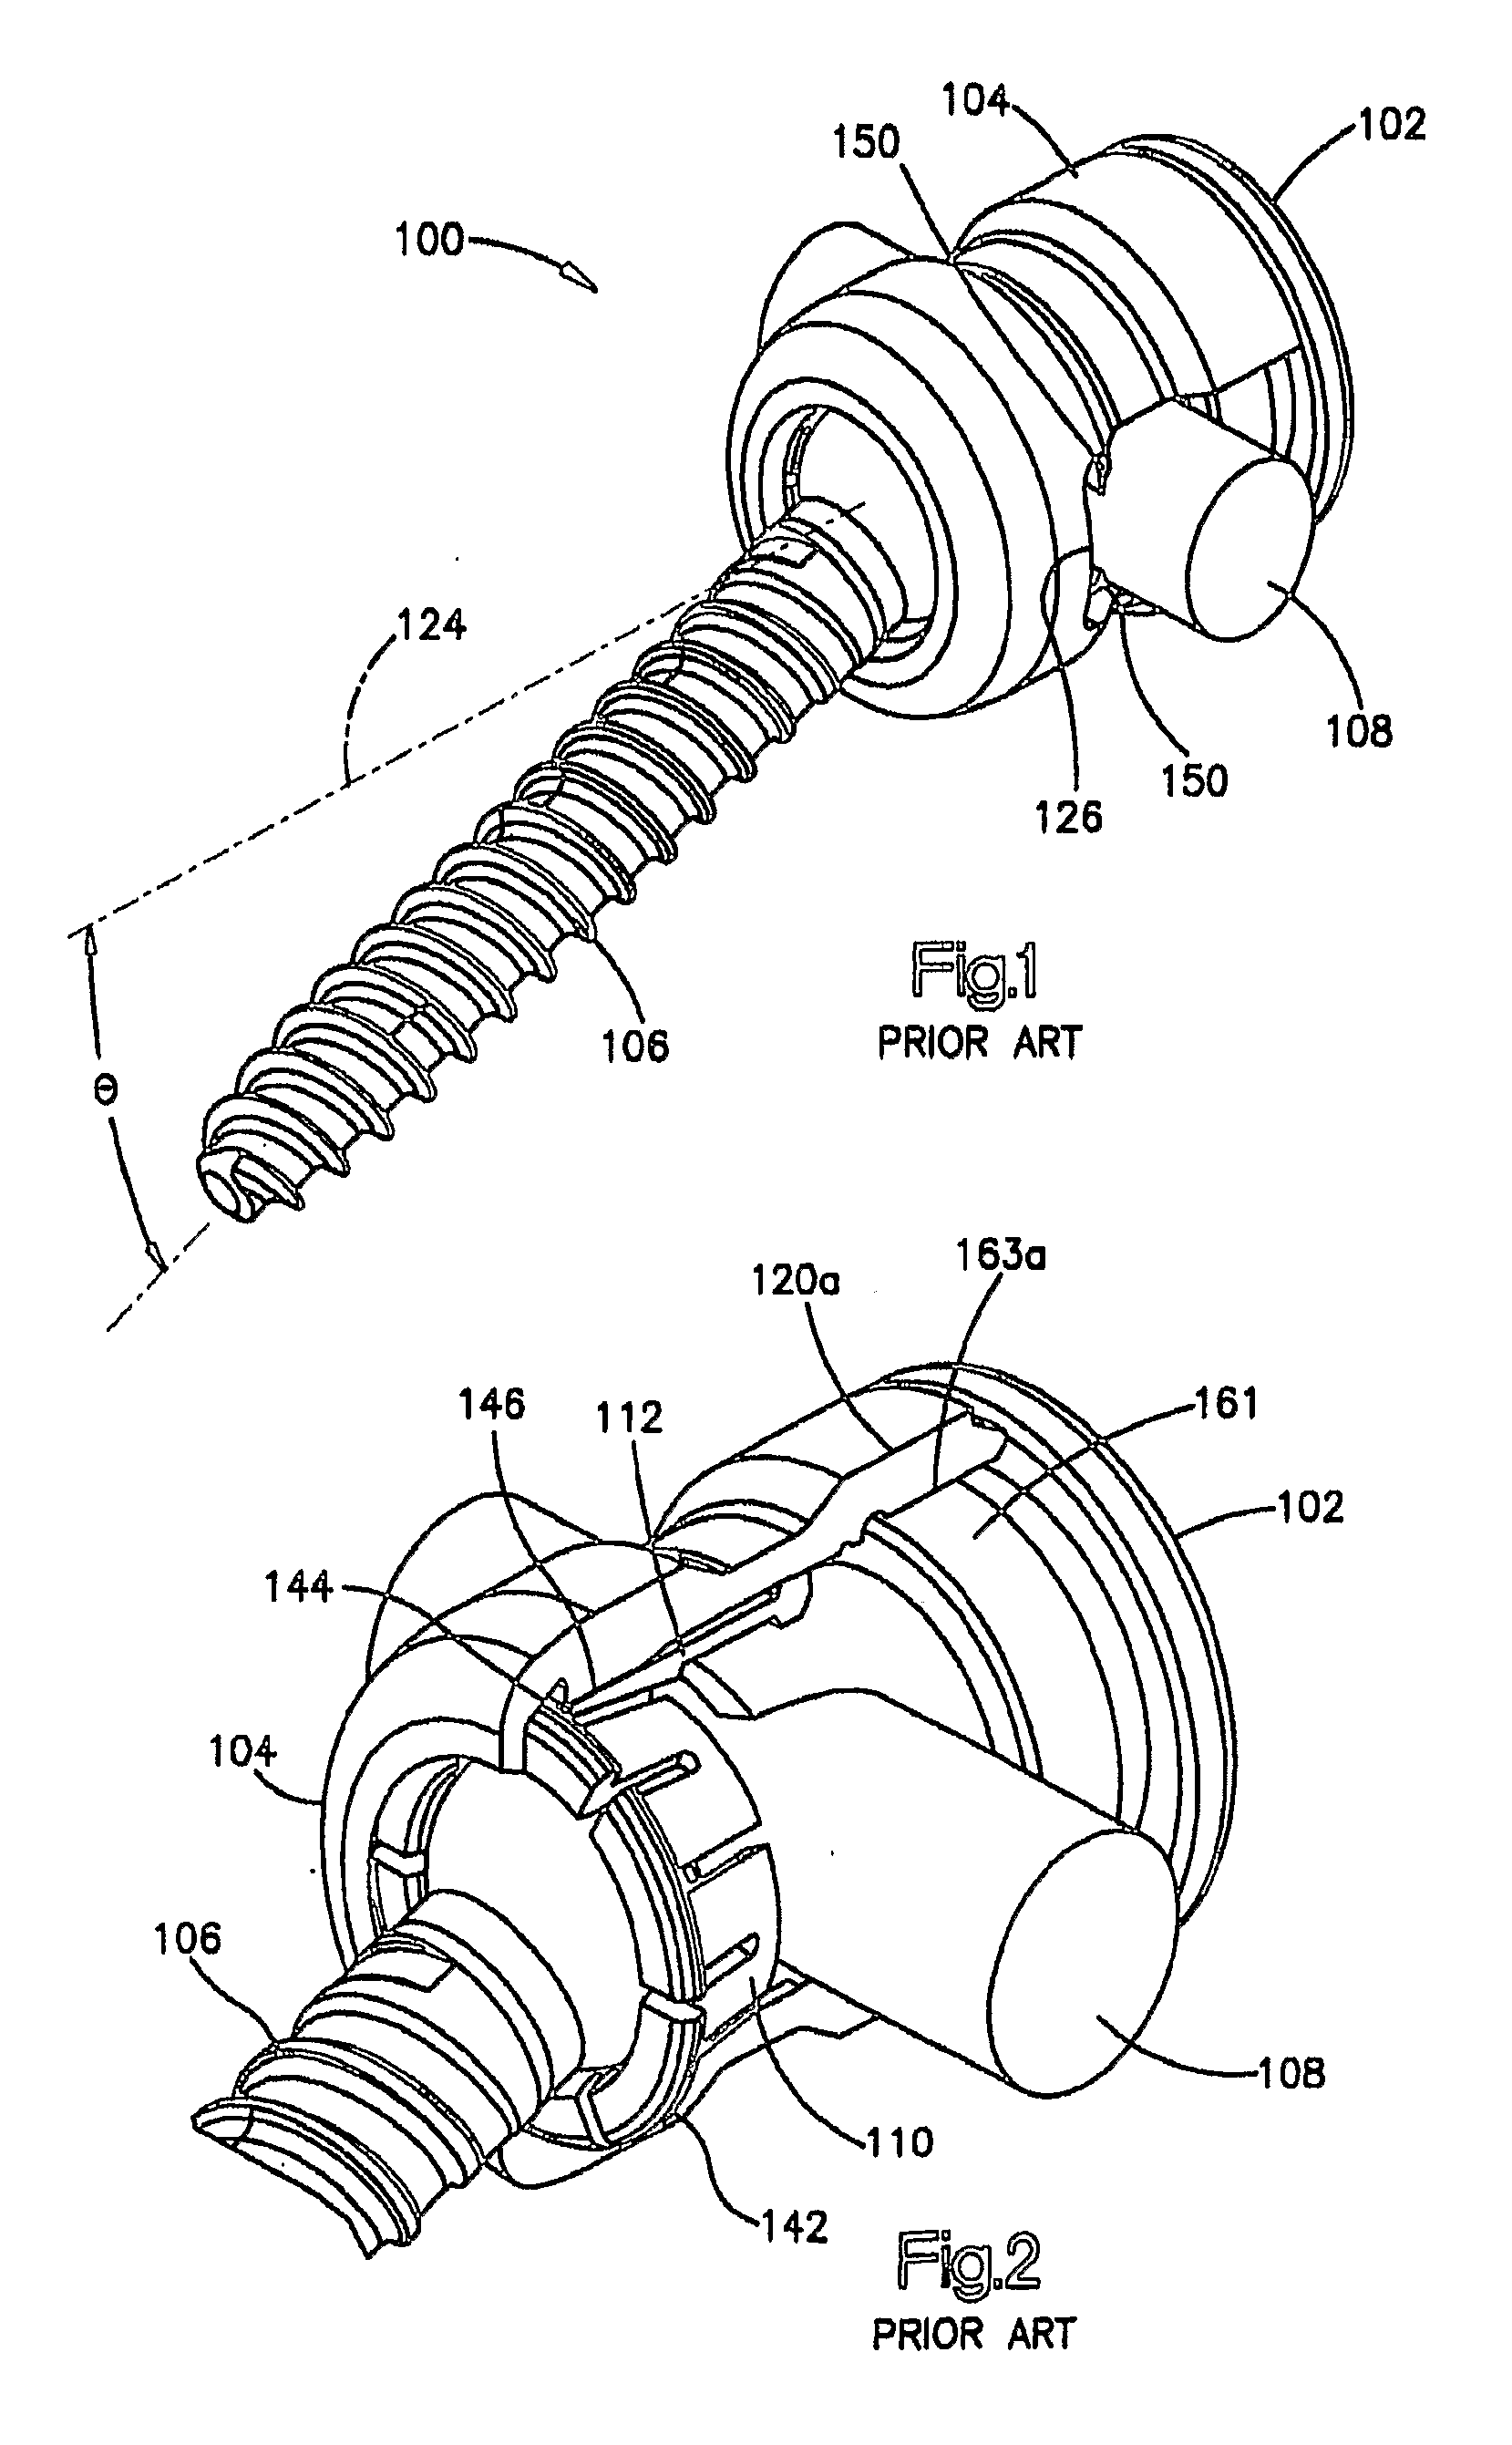 Polyaxial bone anchor with headless pedicle screw